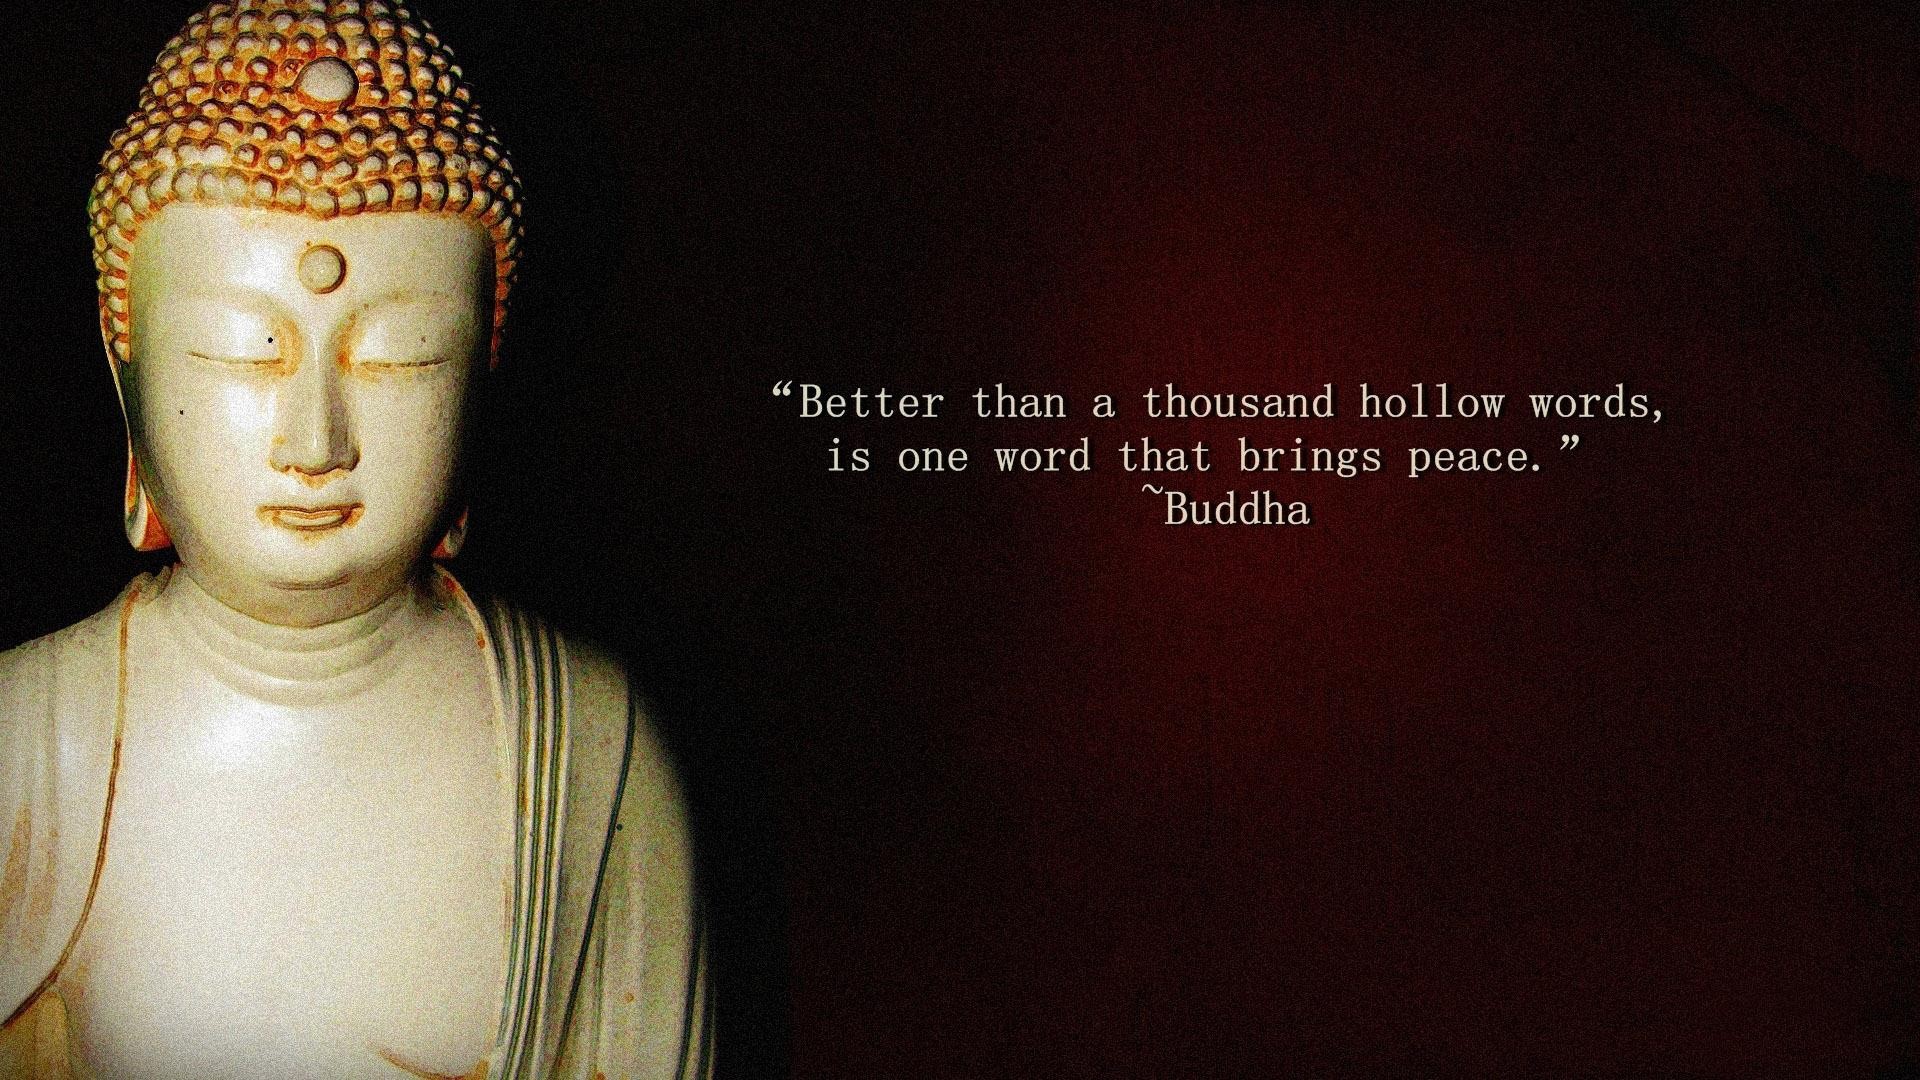 General 1920x1080 Buddha minimalism simple background text Buddhism meditation gradient sculpture quote peace statue